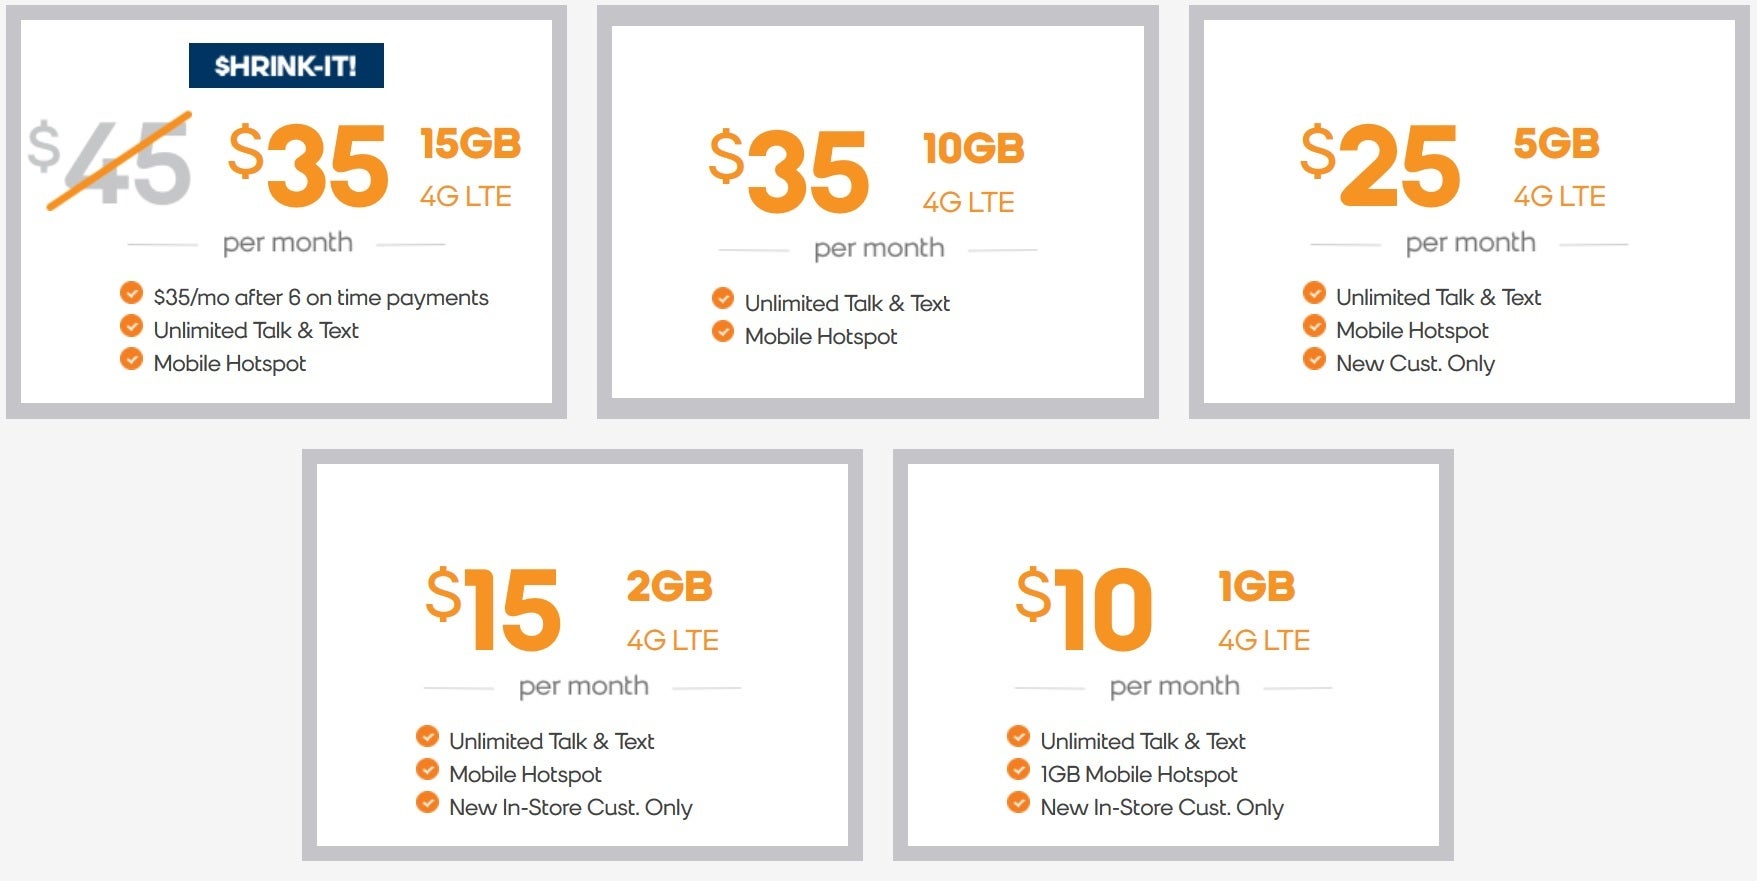 oost Mobile's new plans priced at under $50 a month - Boost Mobile introduces five new wireless plans each priced under $50 per month